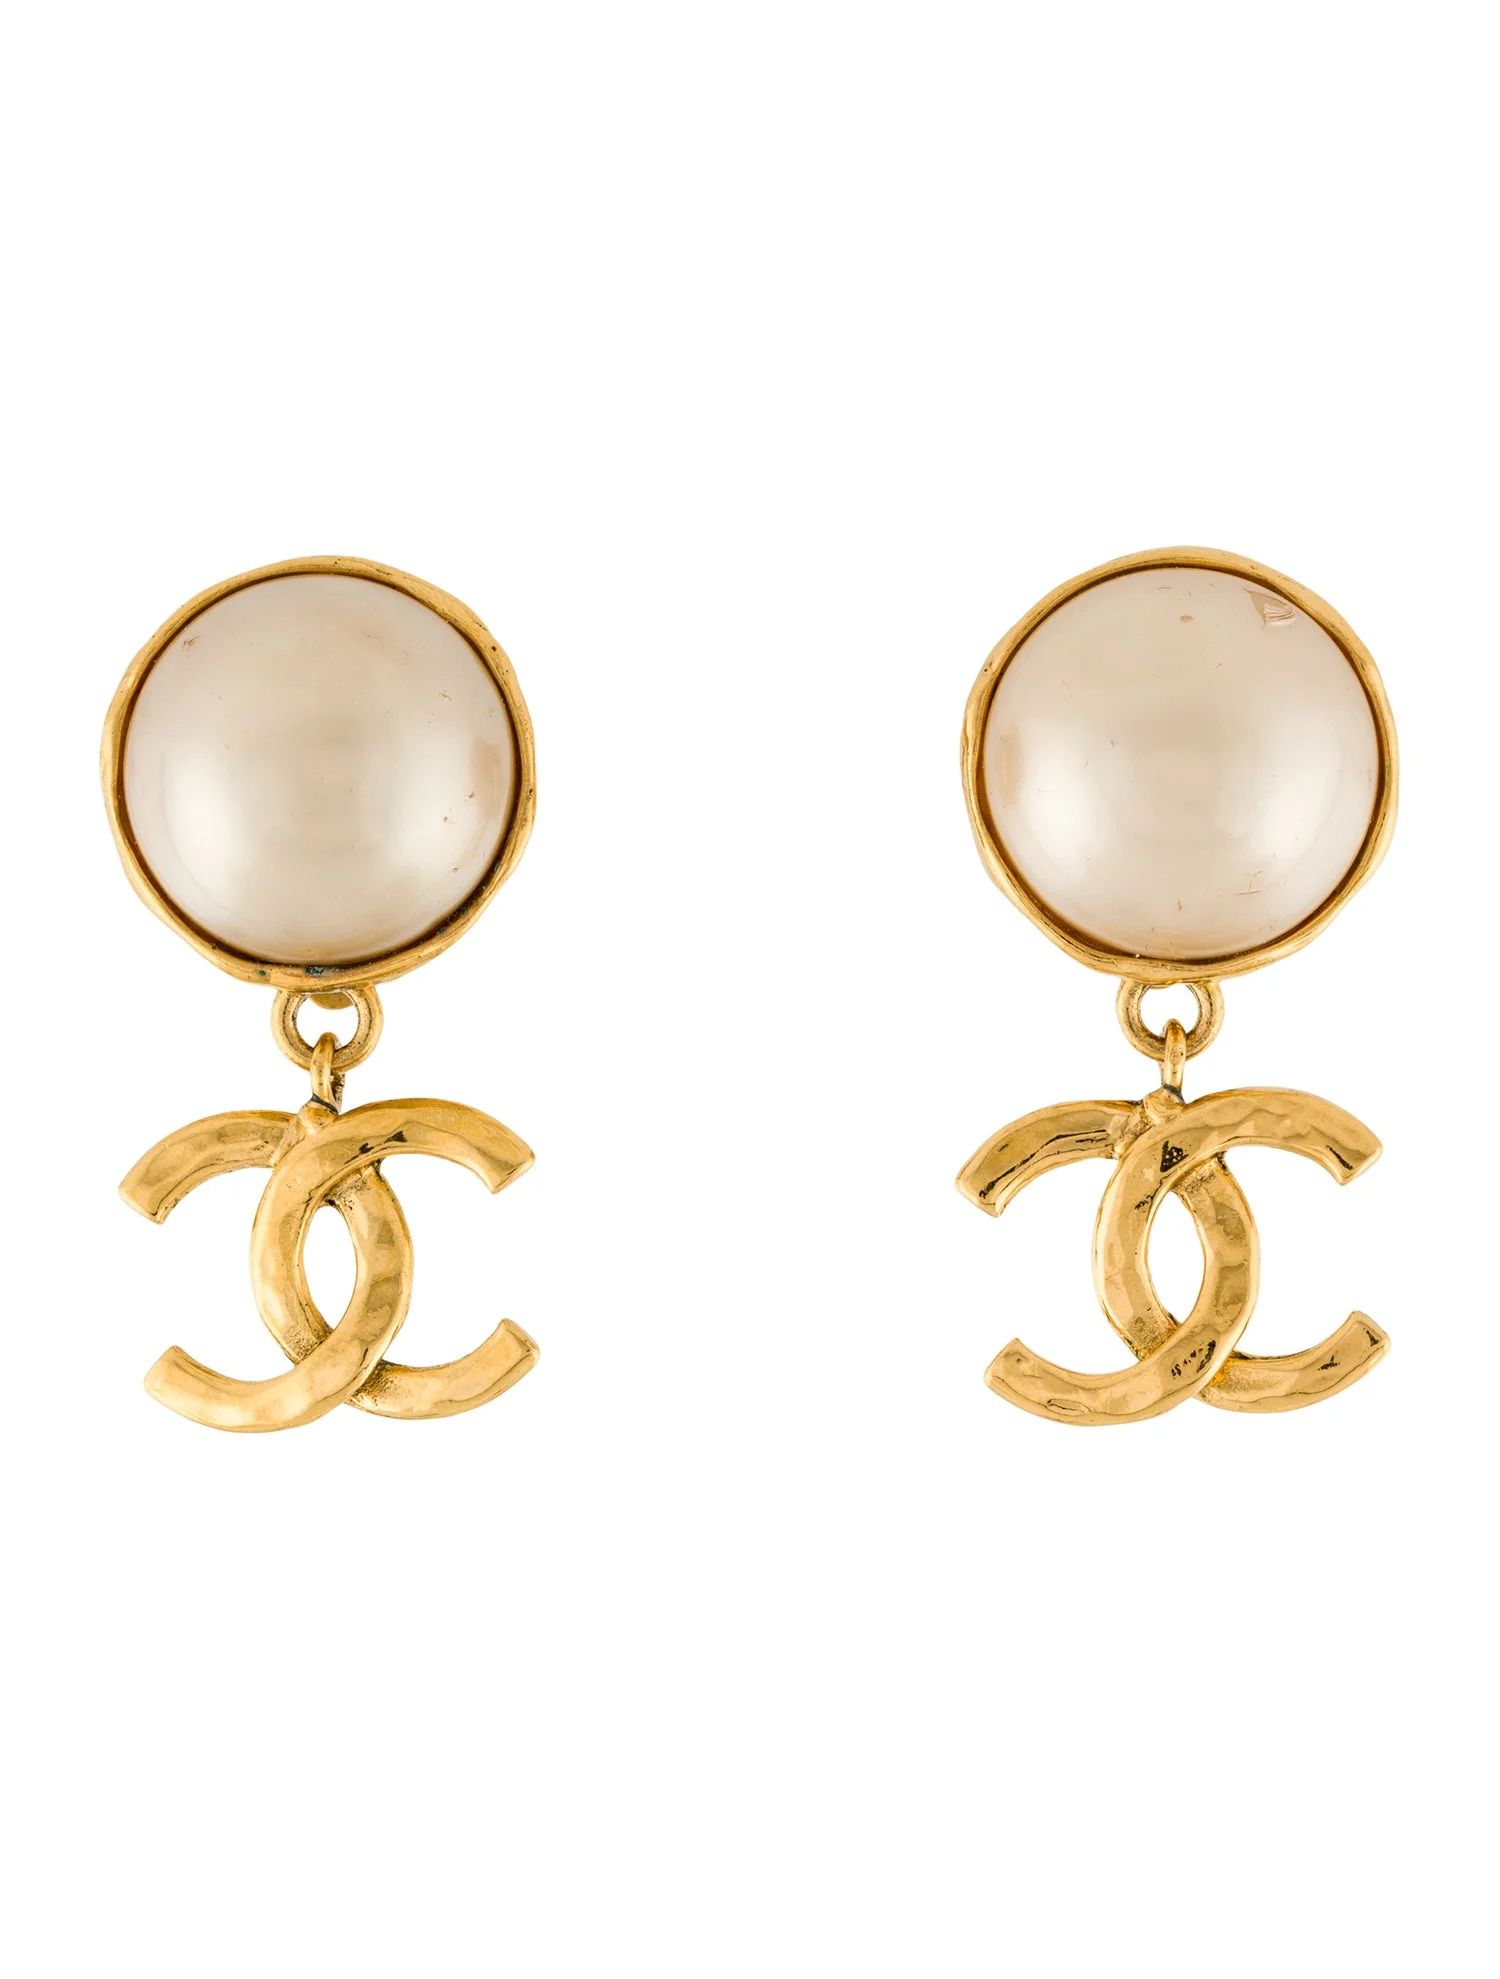 Vintage Faux Pearl CC Clip-On Drop Earrings | The RealReal